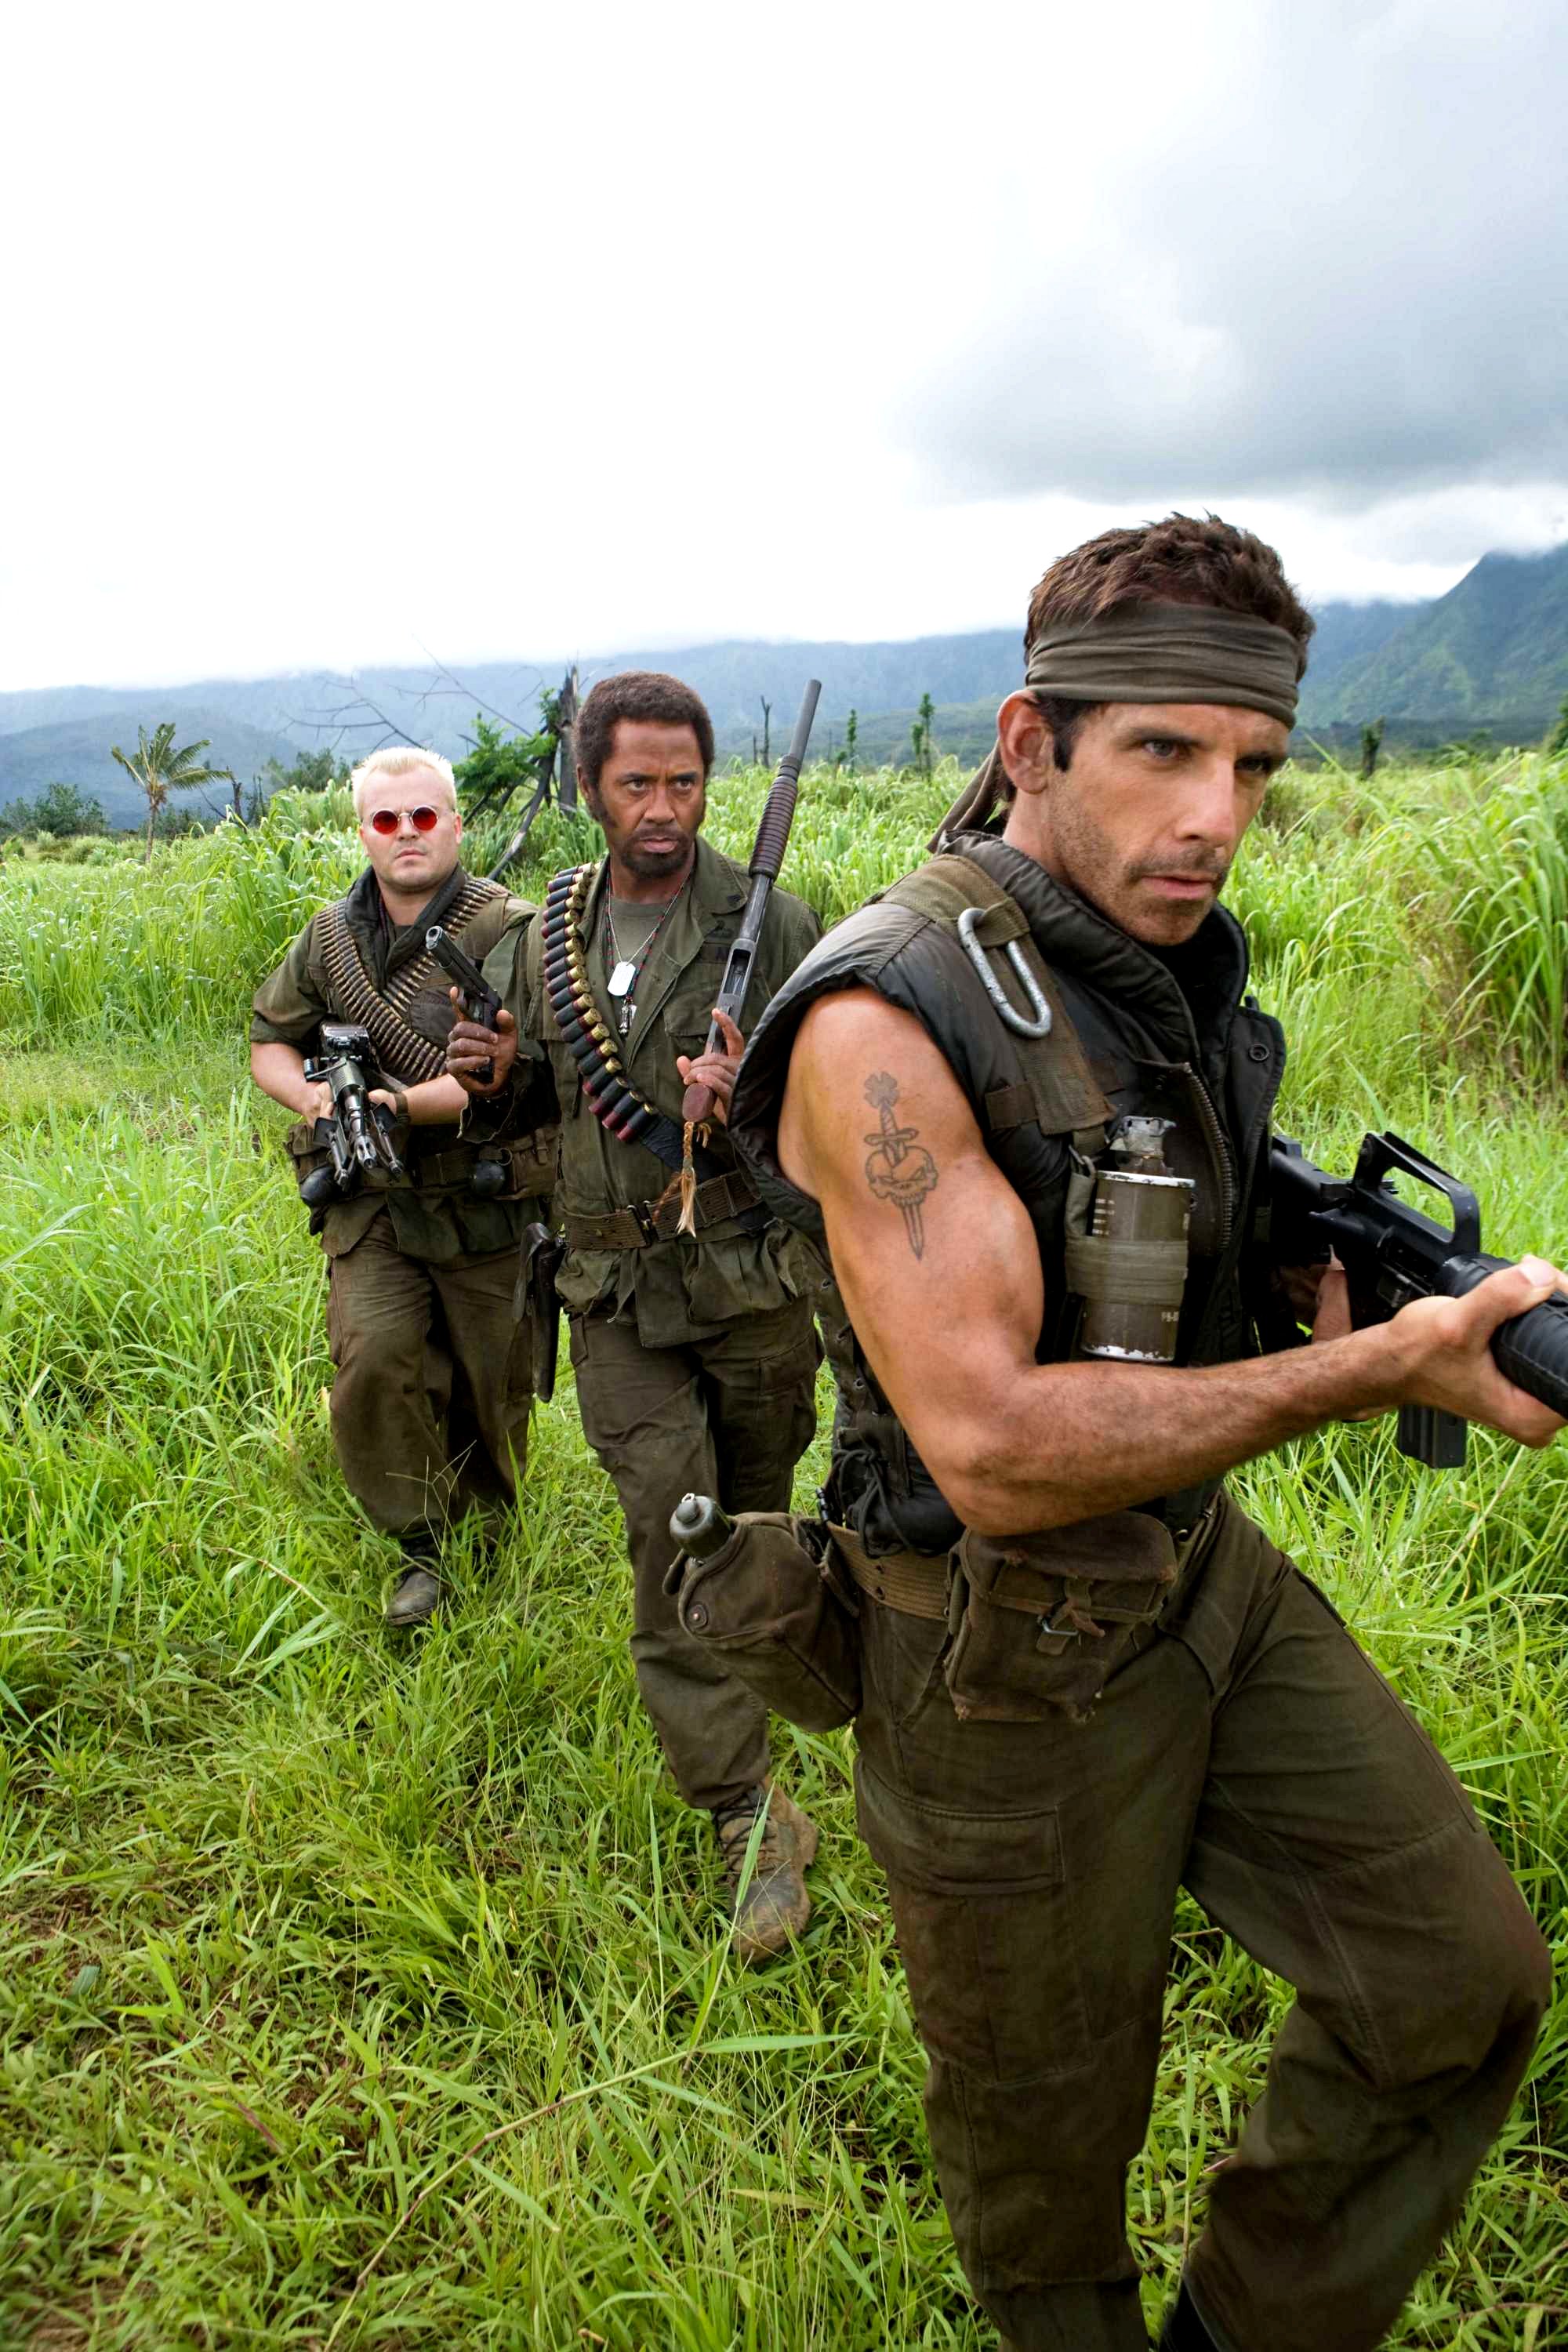 Jack Black, Robert Downey Jr. and Ben Stiller in DreamWorks Pictures' Tropic Thunder (2008). Photo credit by Merie Weismiller Wallace.